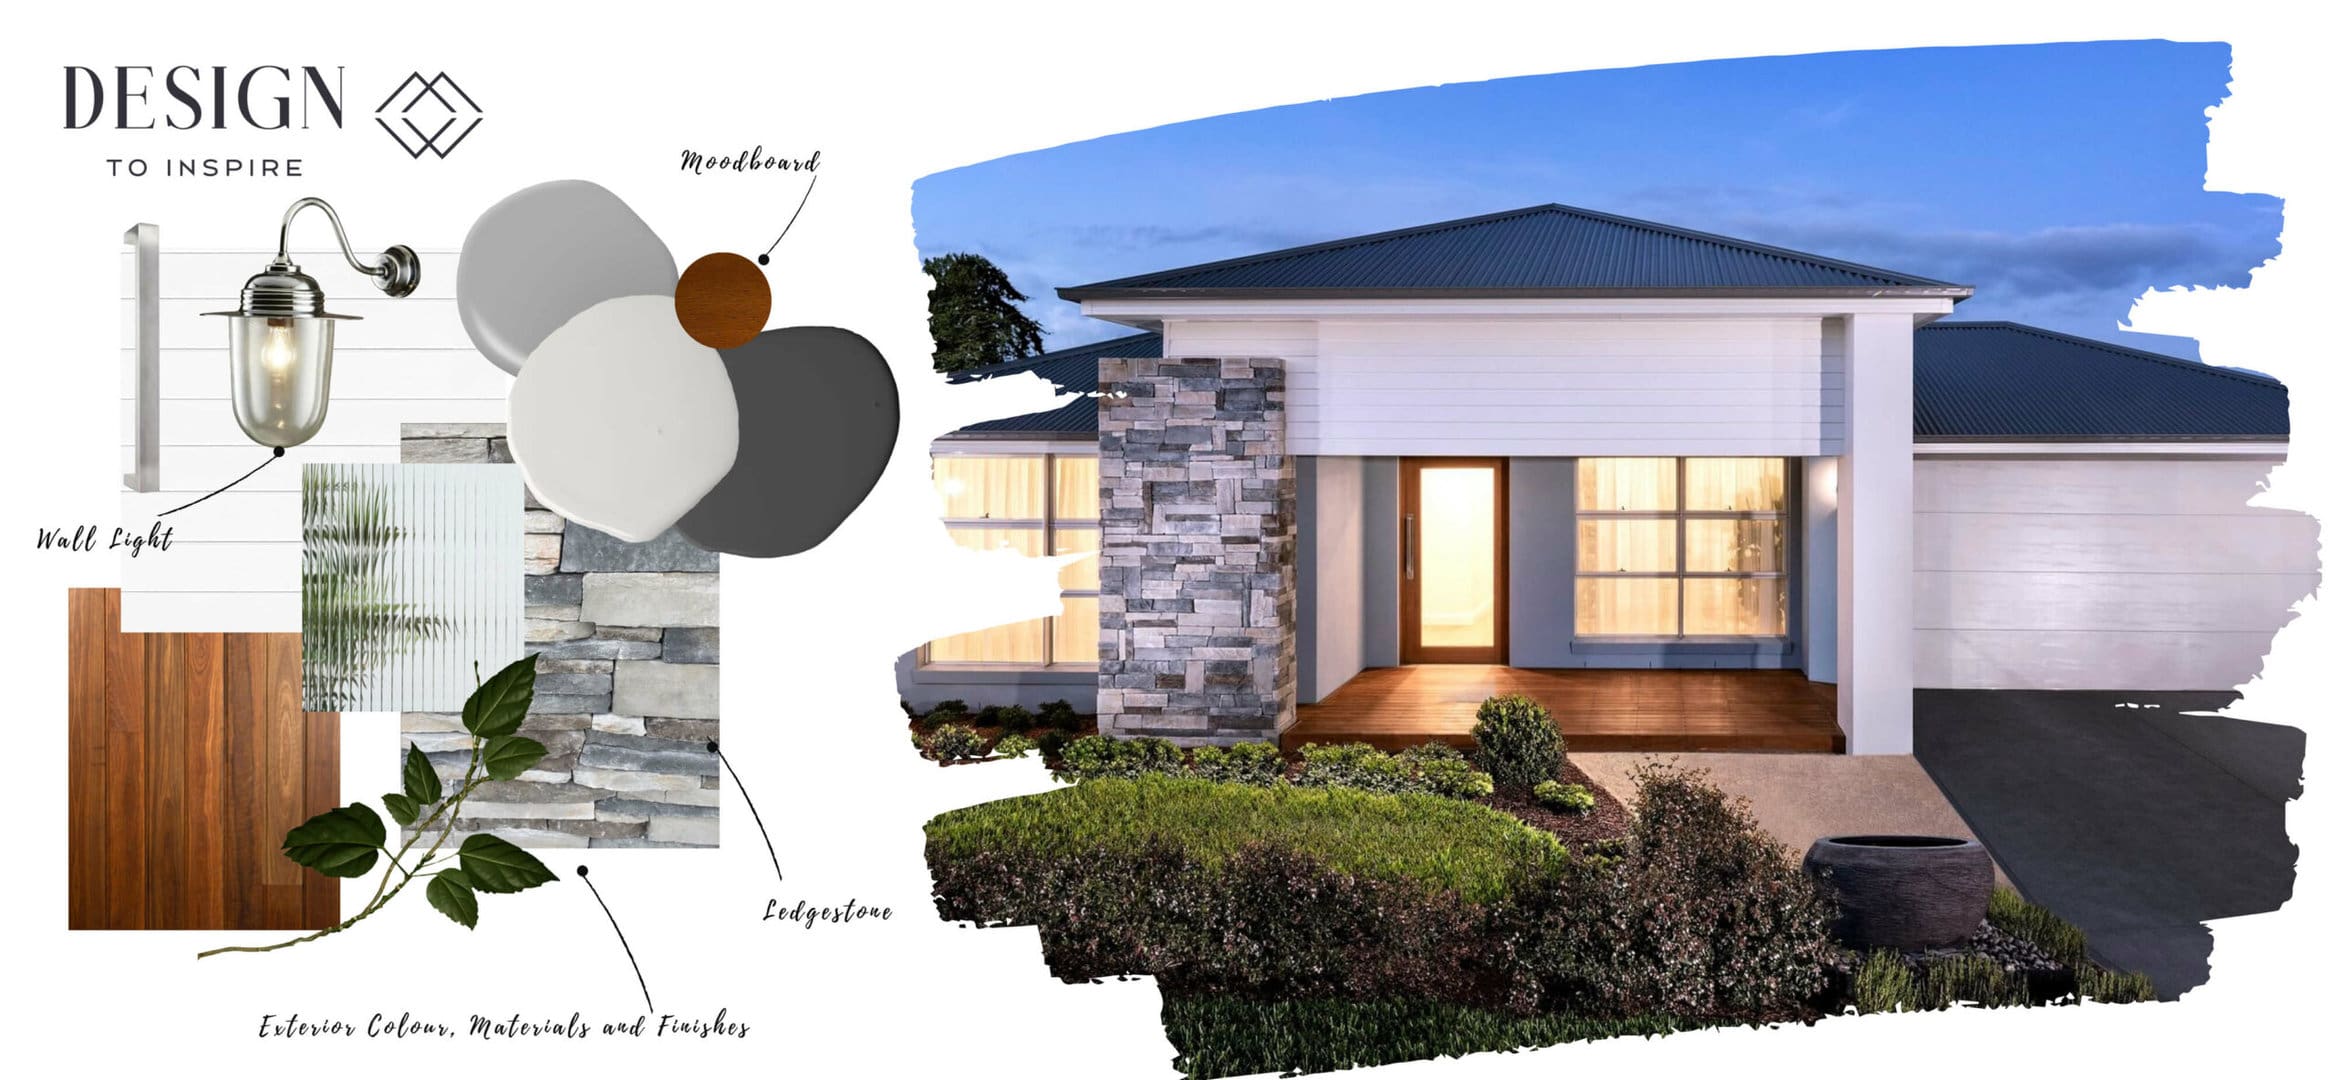 Visual representation of exterior finishes and colors